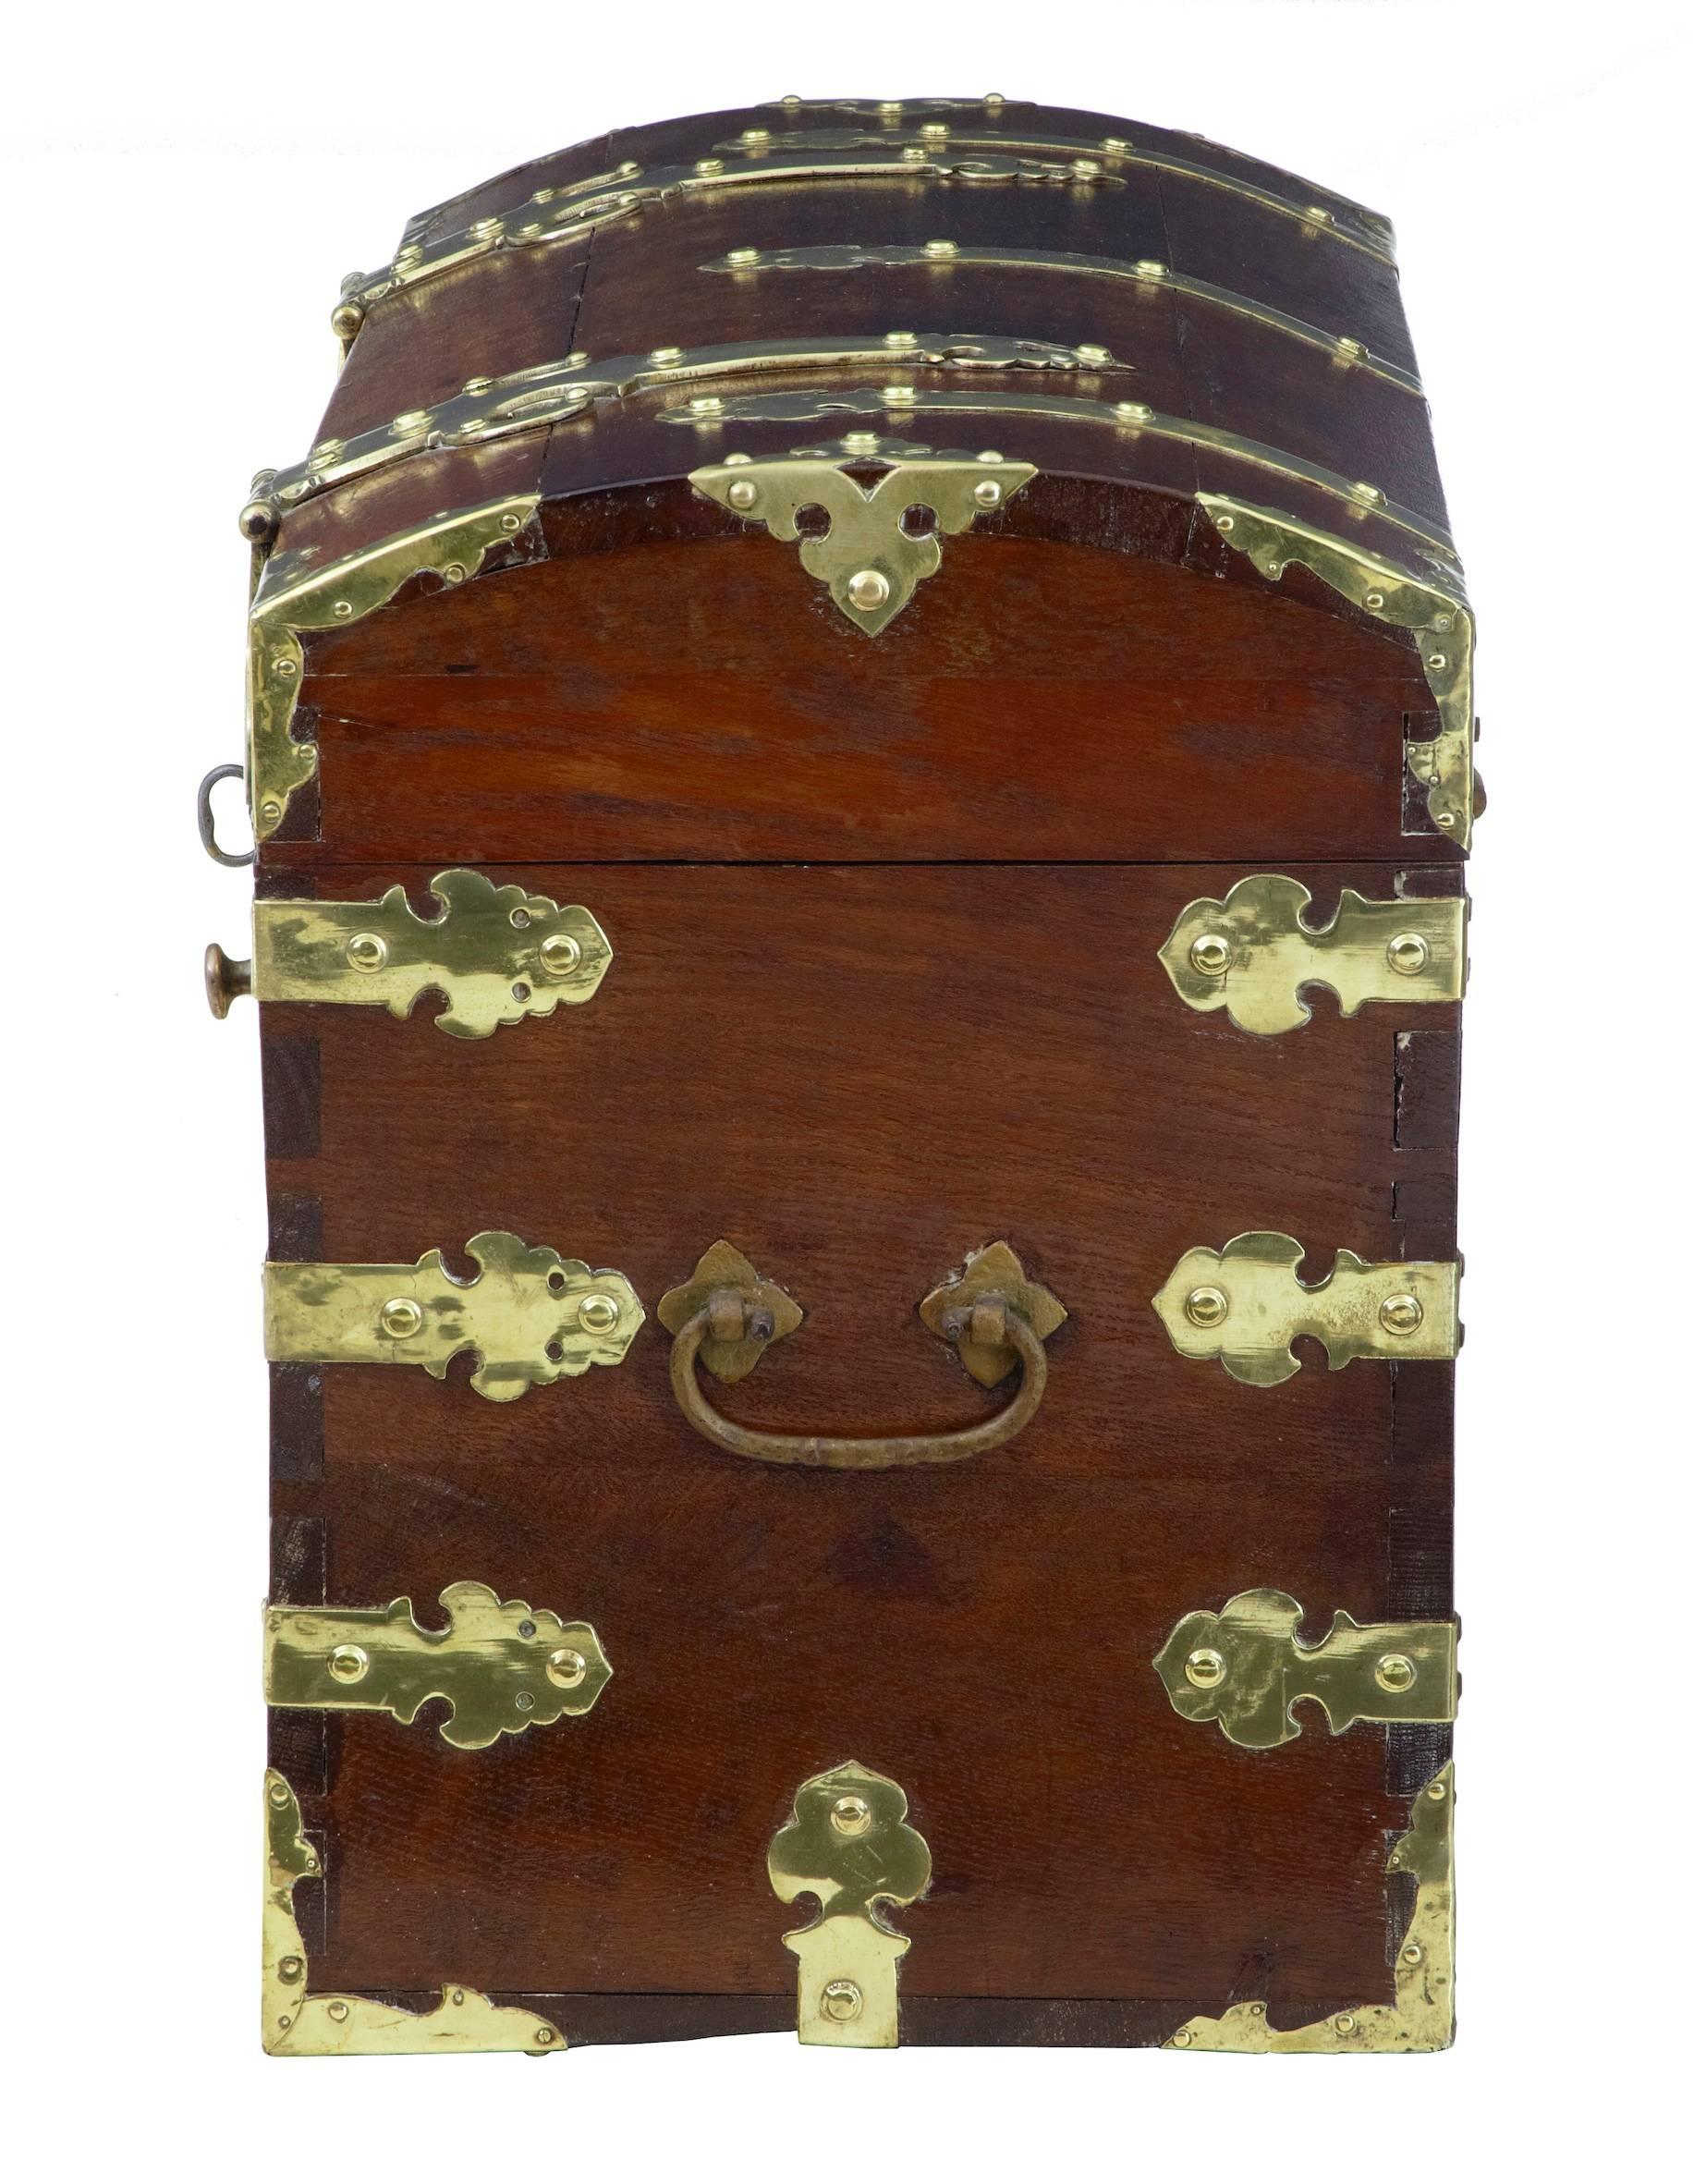 Debenham antiques is pleased to be able this stunning rare Silk Road coffer, circa 1740.
With a Scandinavian applied brass royal crest on the front which we can attribute to either Denmark or Sweden. As this box/coffer made its journeys to the